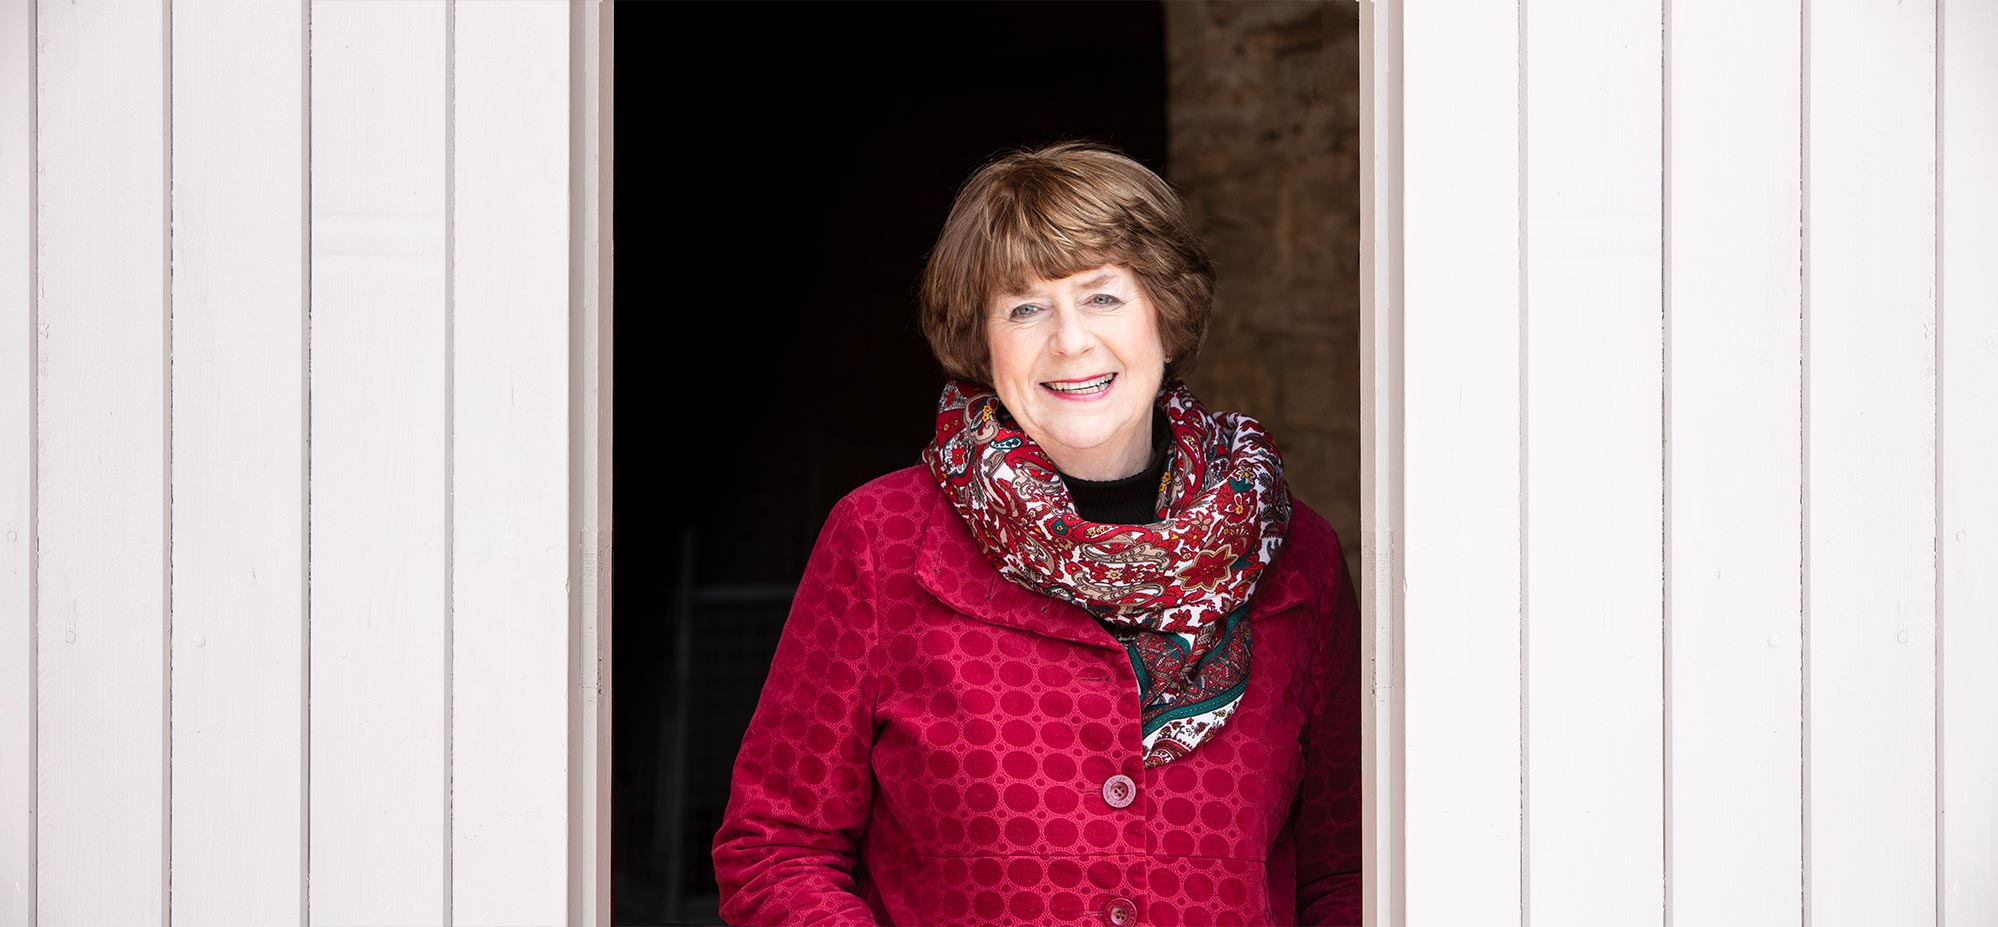 Pam Ayres Outside